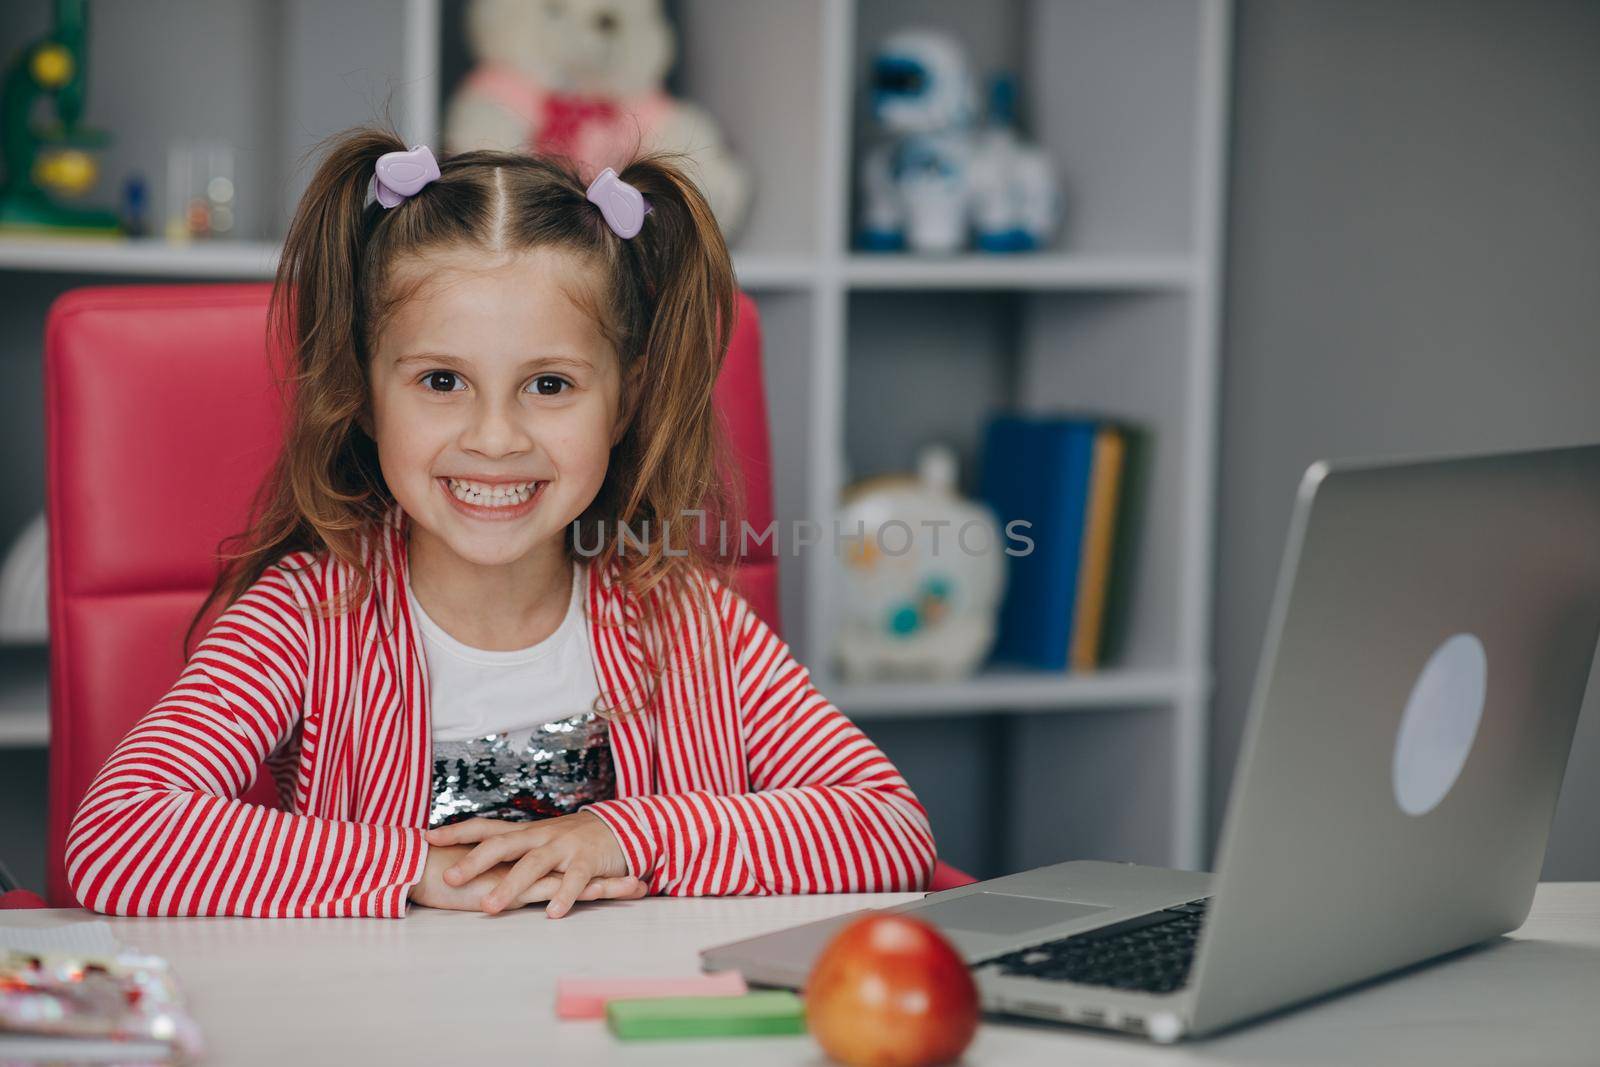 Smiling adorable elementary school age child learning class alone sitting at table with laptop. Cute kid girl doing homework.